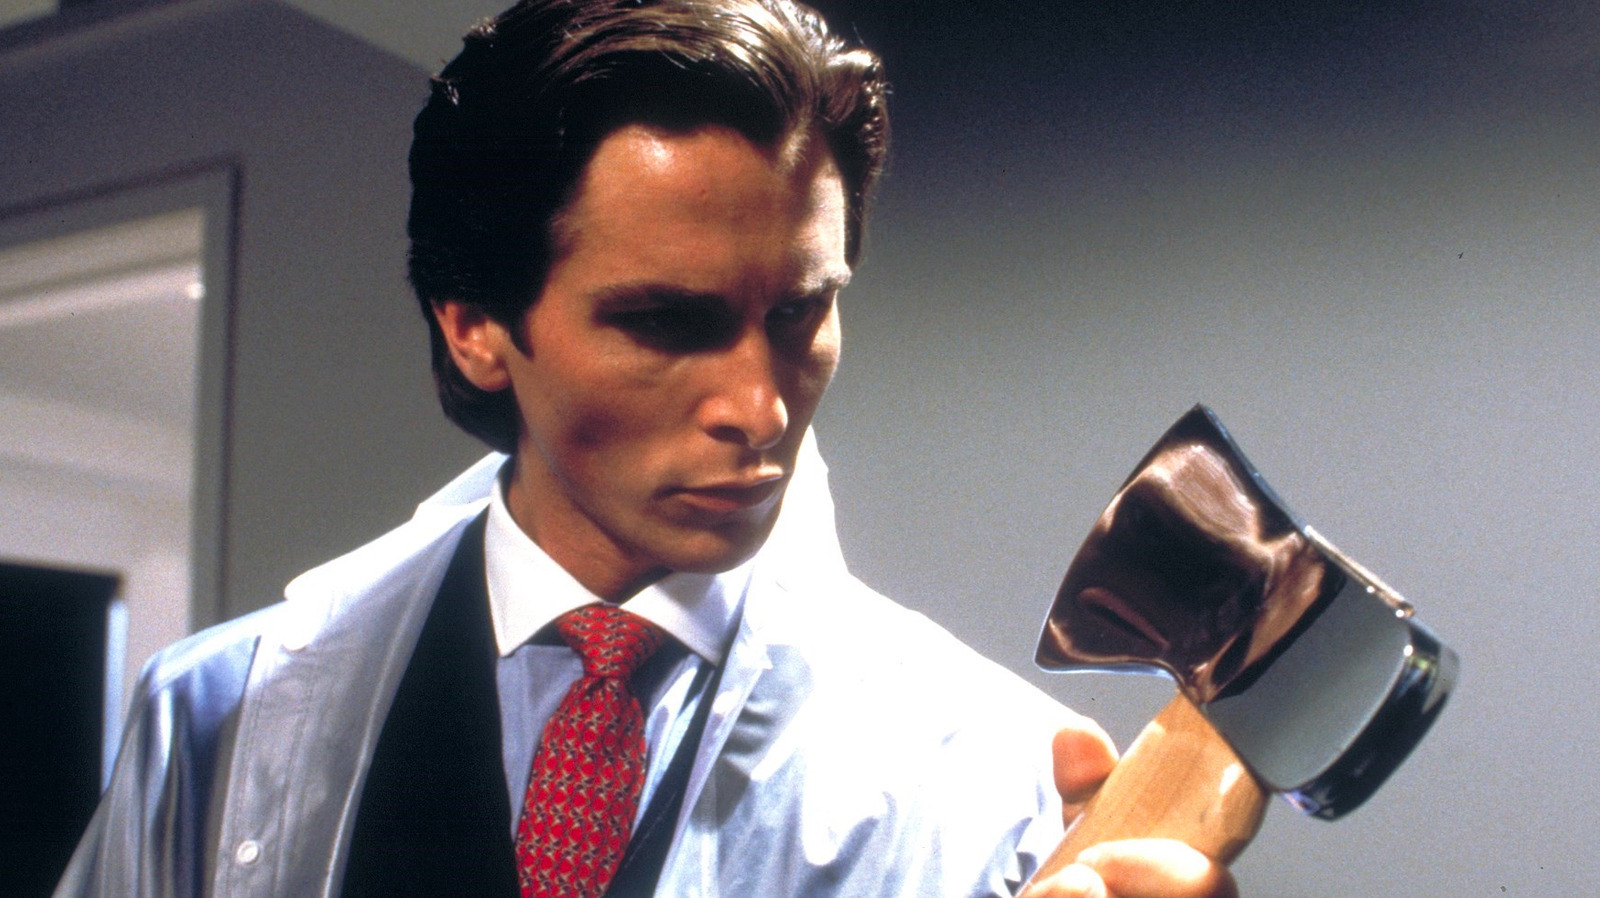 You Can't Say 'American Psycho' Didn't Warn Us About This